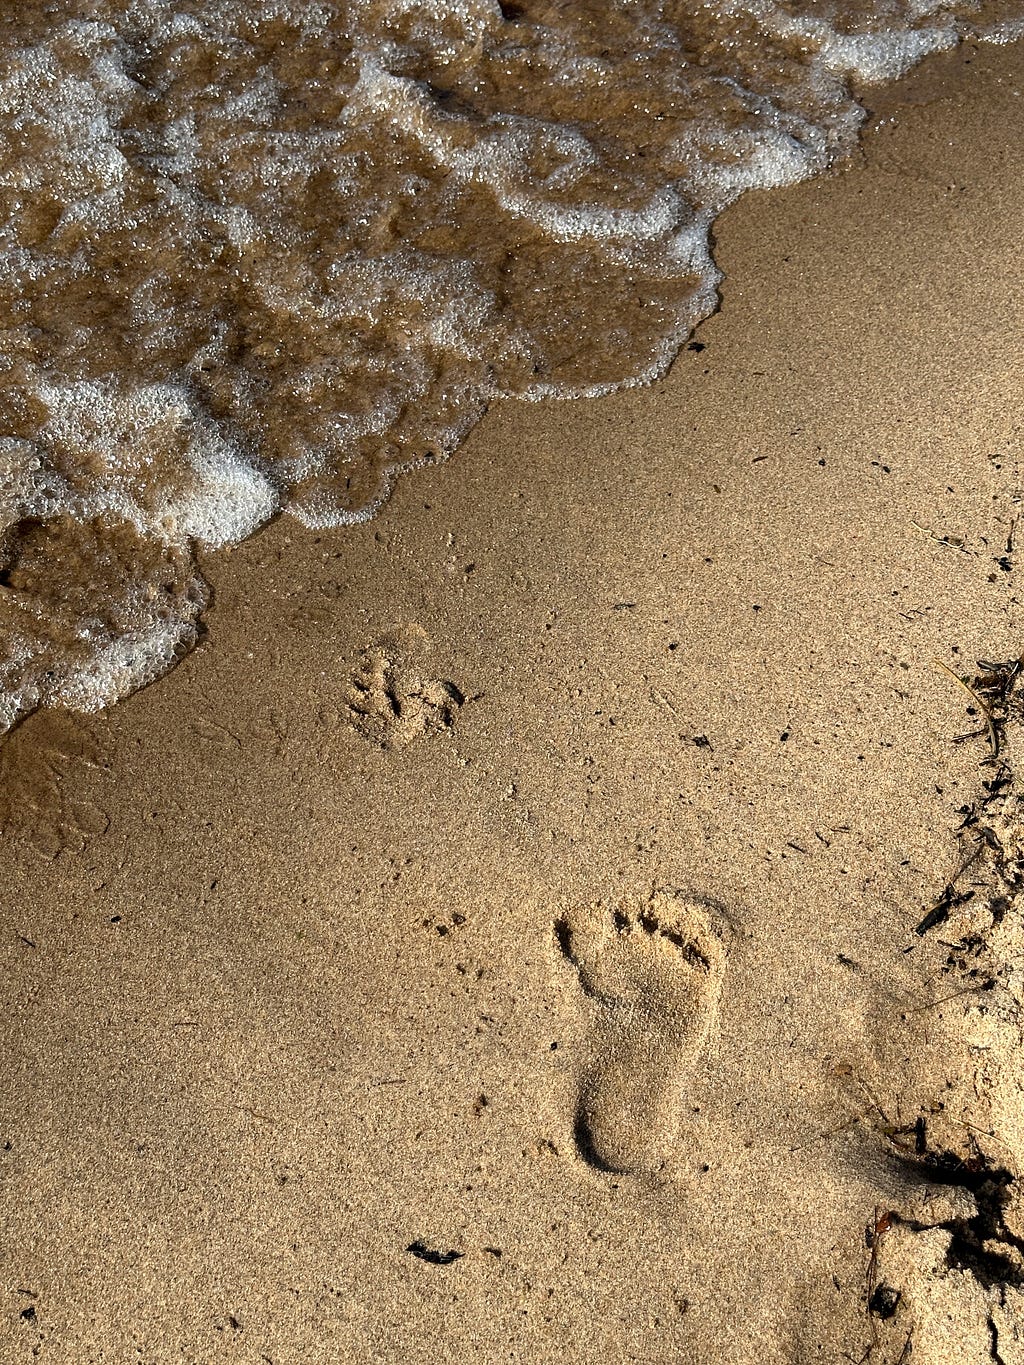 Footprints on the beach of Lake Superior